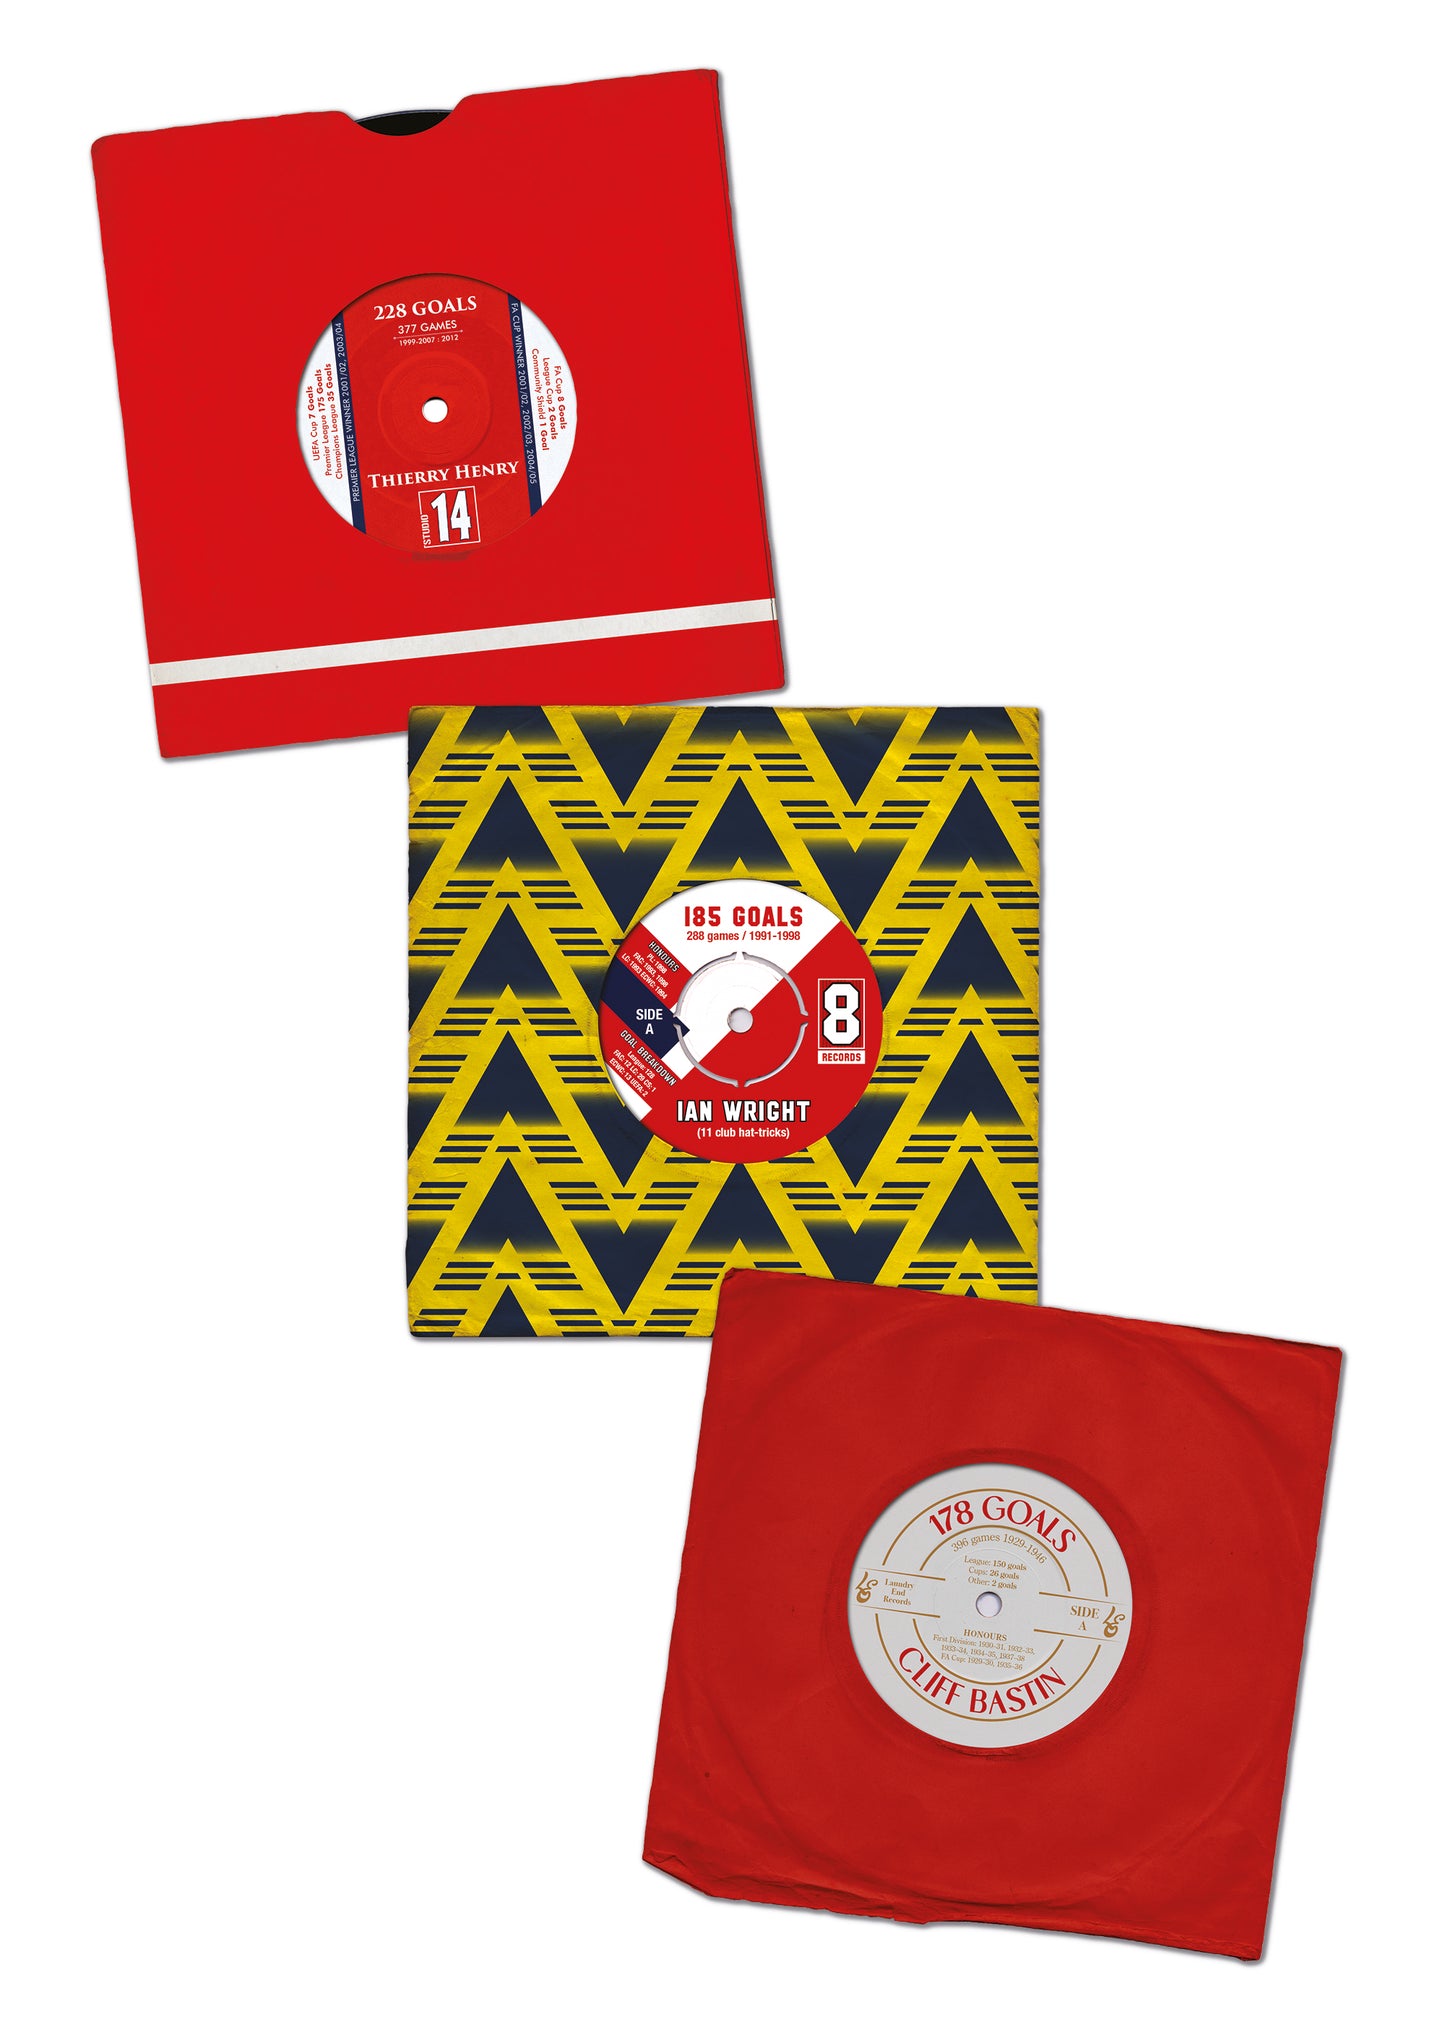 Arsenal Record Goalscorers - Top 3 Players - Thierry Henry - Ian Wright - Cliff Bastin - 7 Inch Single - 45 RPM - Vinyl Record - Football Poster (Various Sizes)